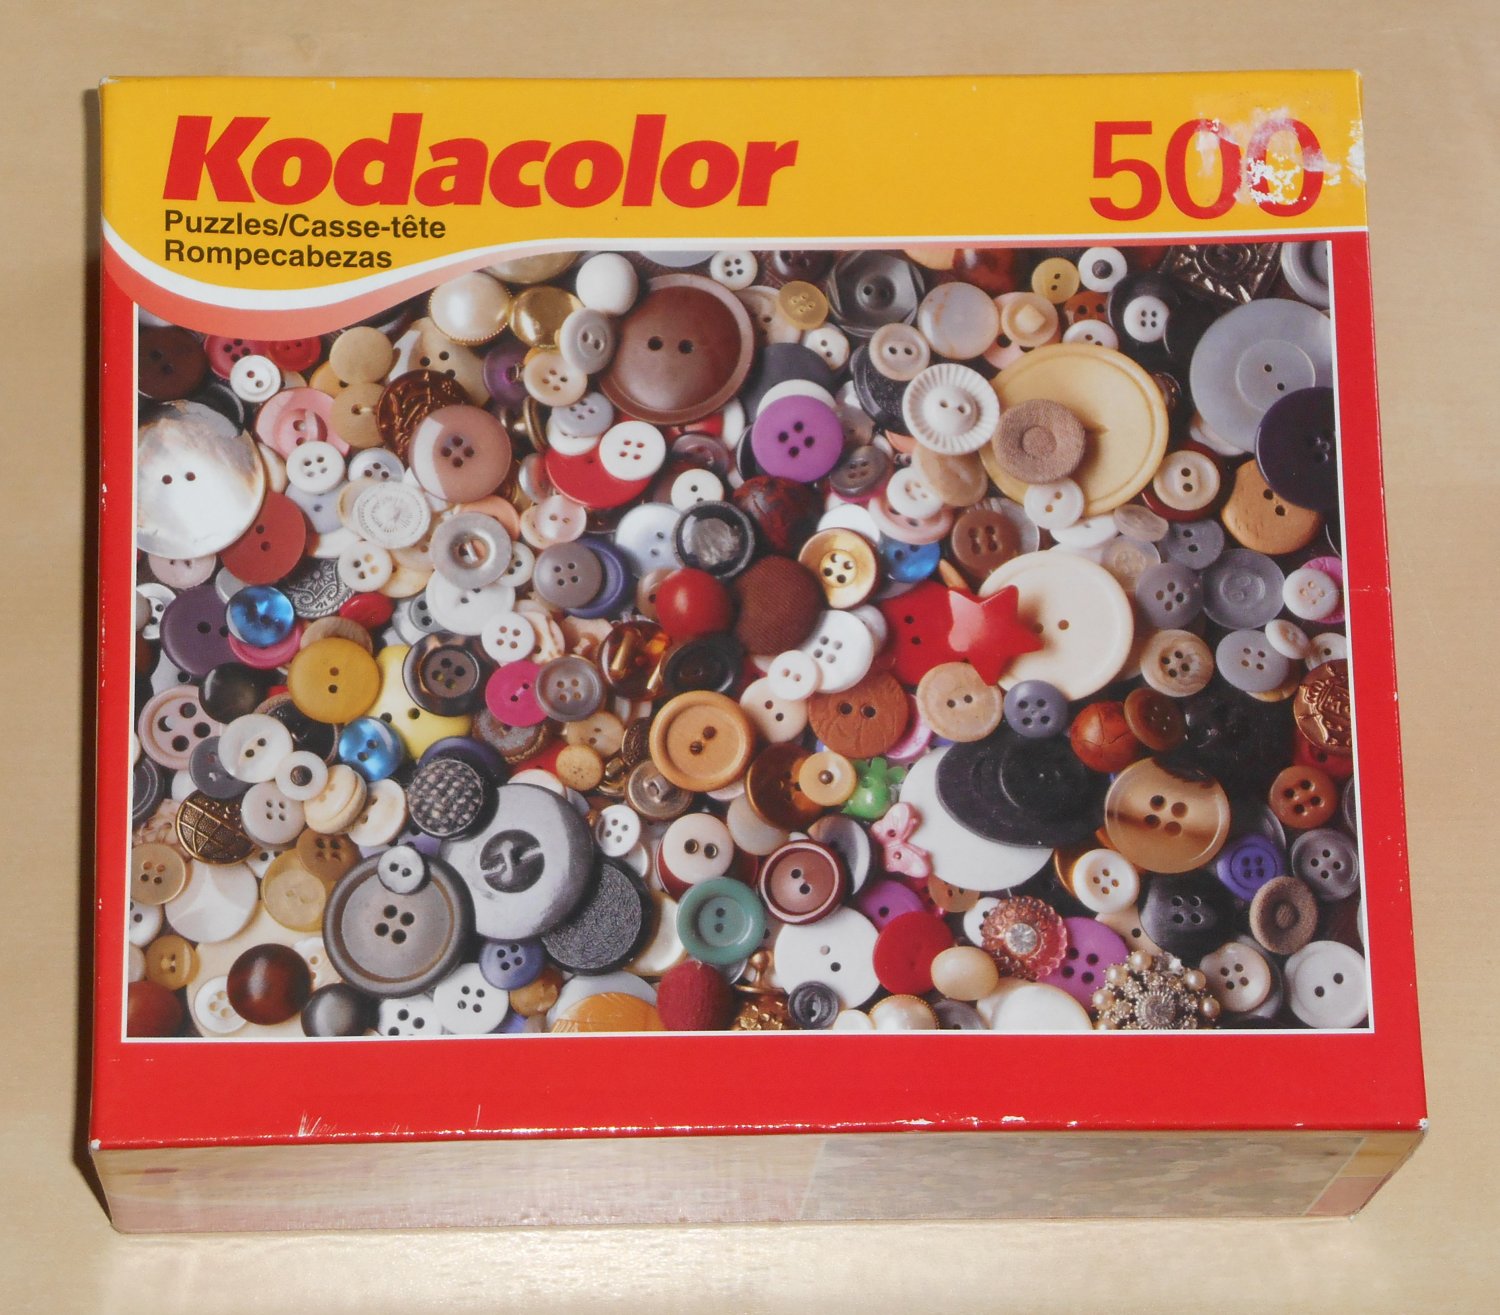 Buttons Buttons 500 Piece Jigsaw Puzzle Kodacolor 20500 COMPLETE 2005 RoseArt